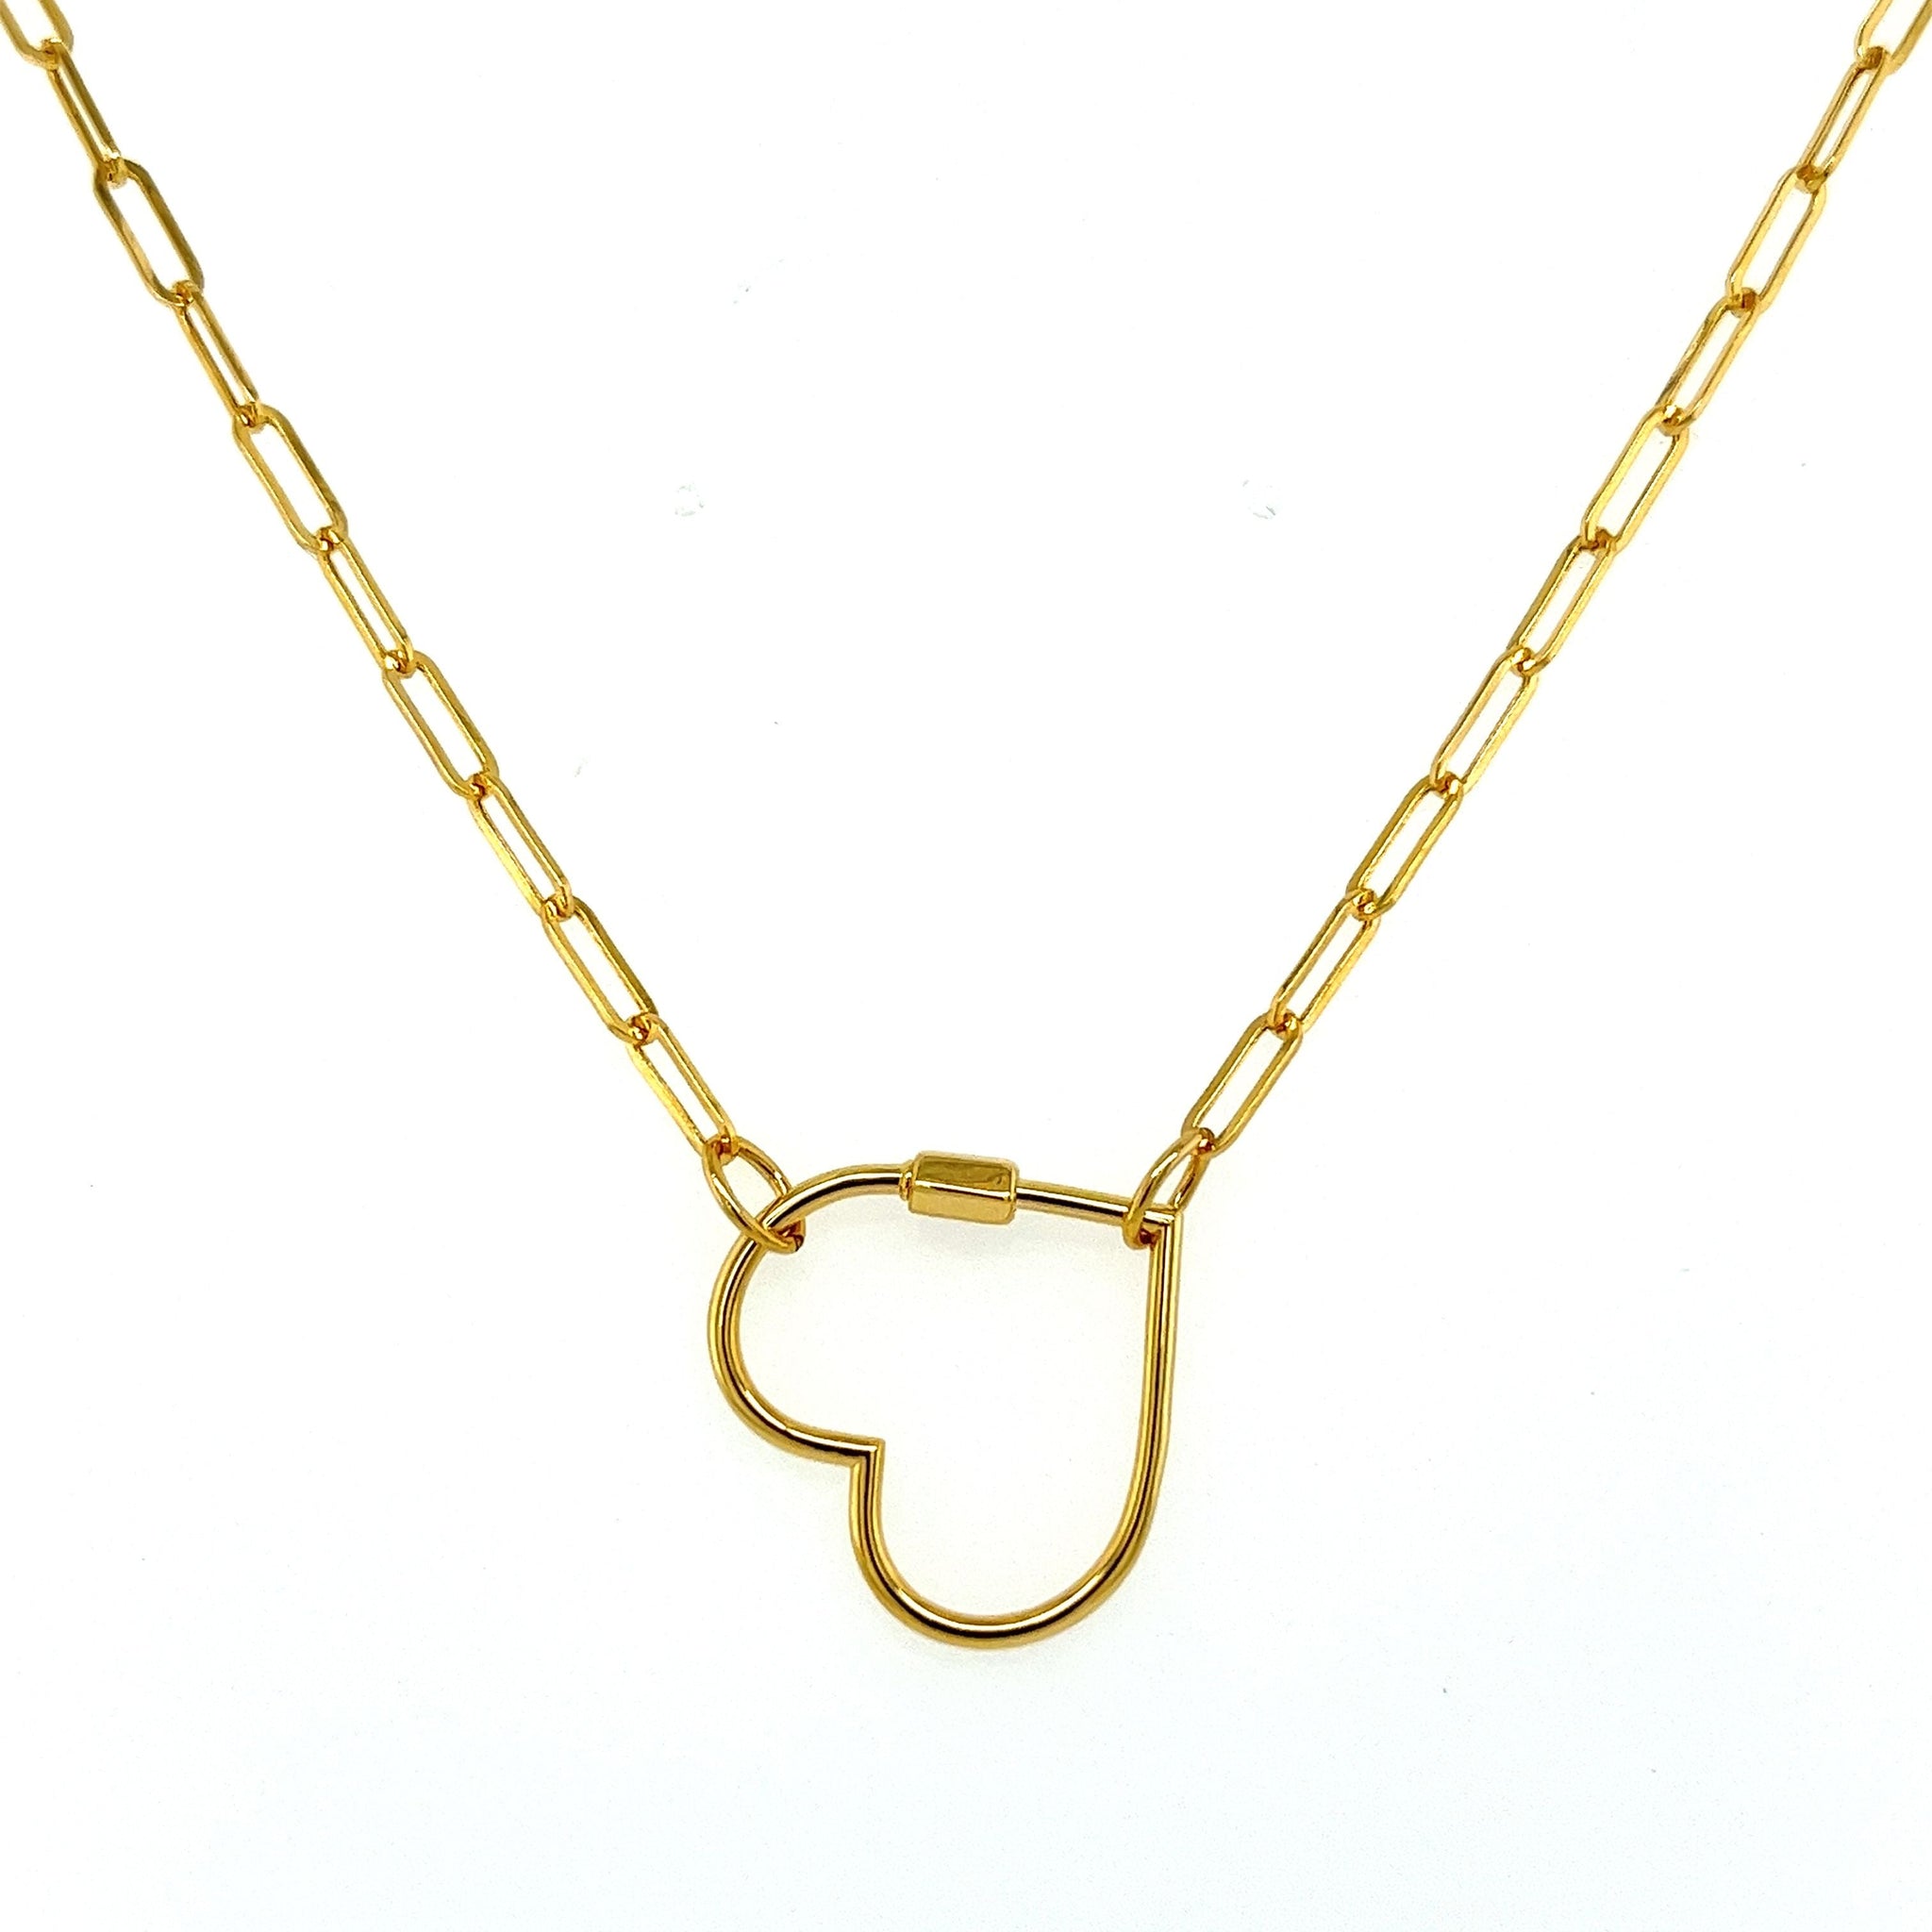 14kt Yellow Gold Paperclip Bracelet with Heart Charm